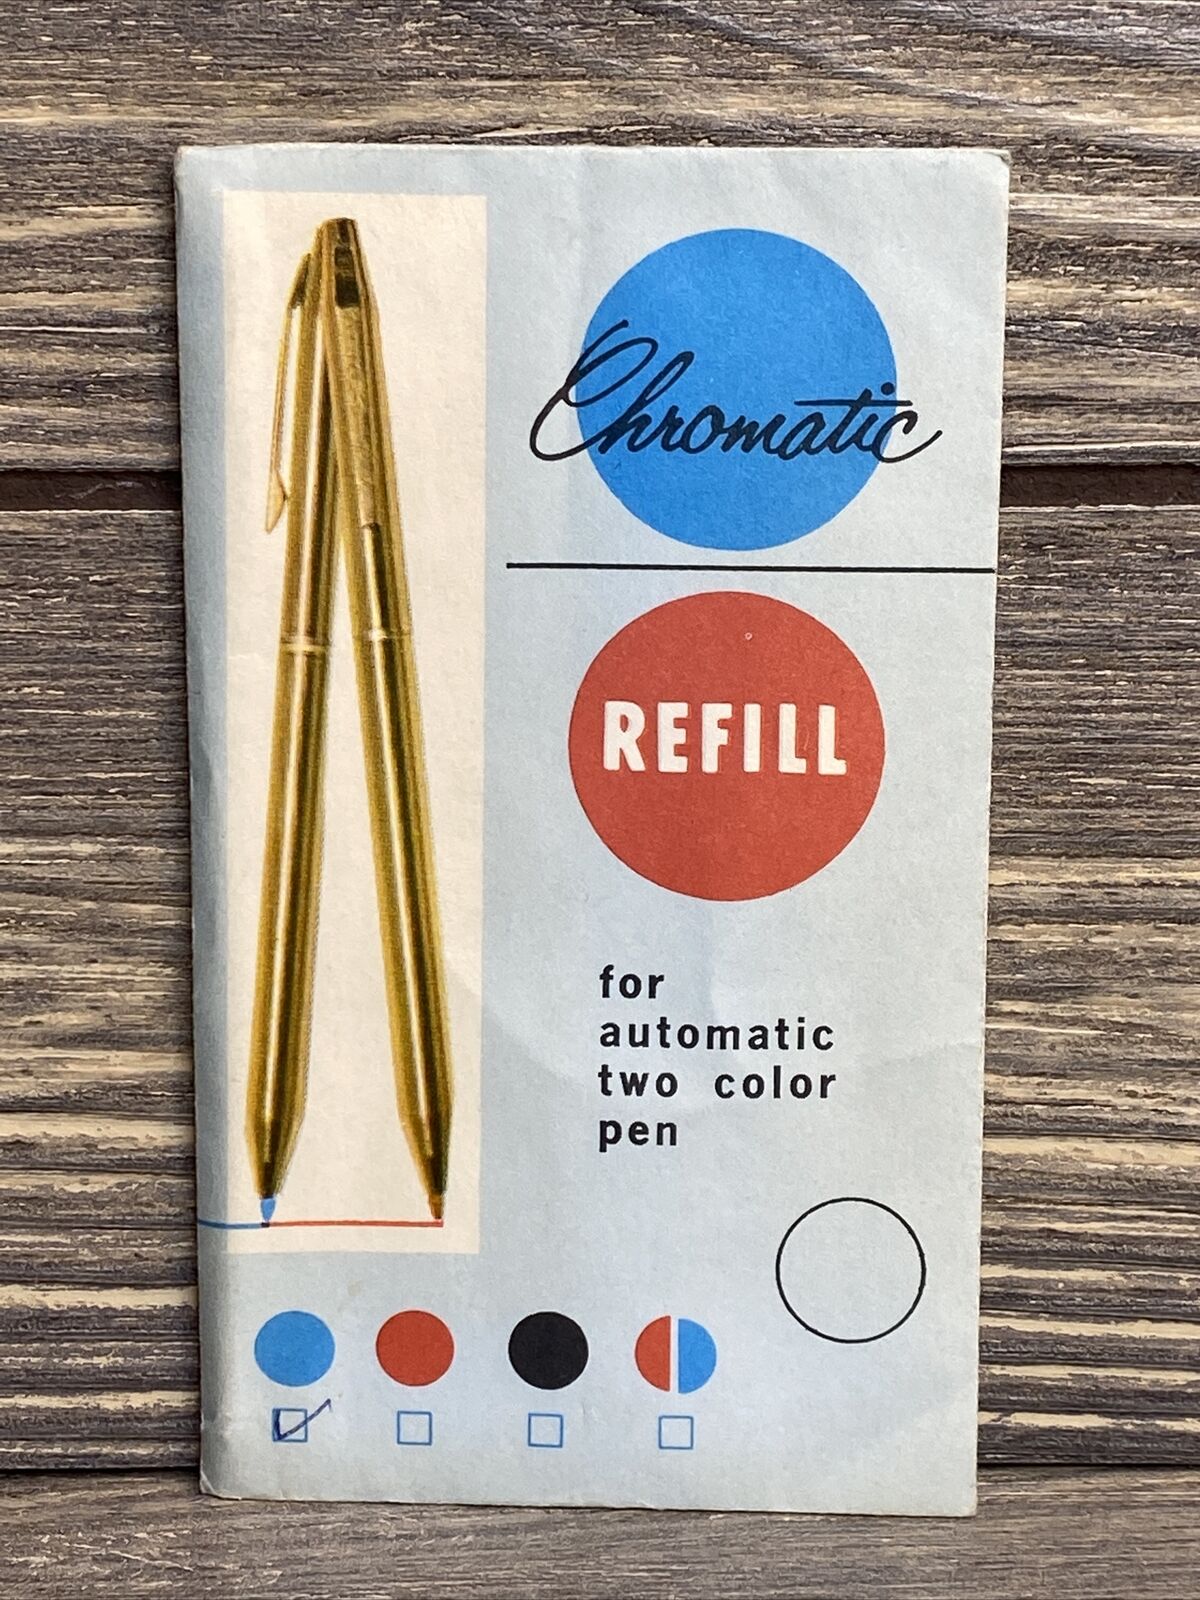 Vintage Chromatic Refill For Automatic Rwo Color Pen Blue Ink A4